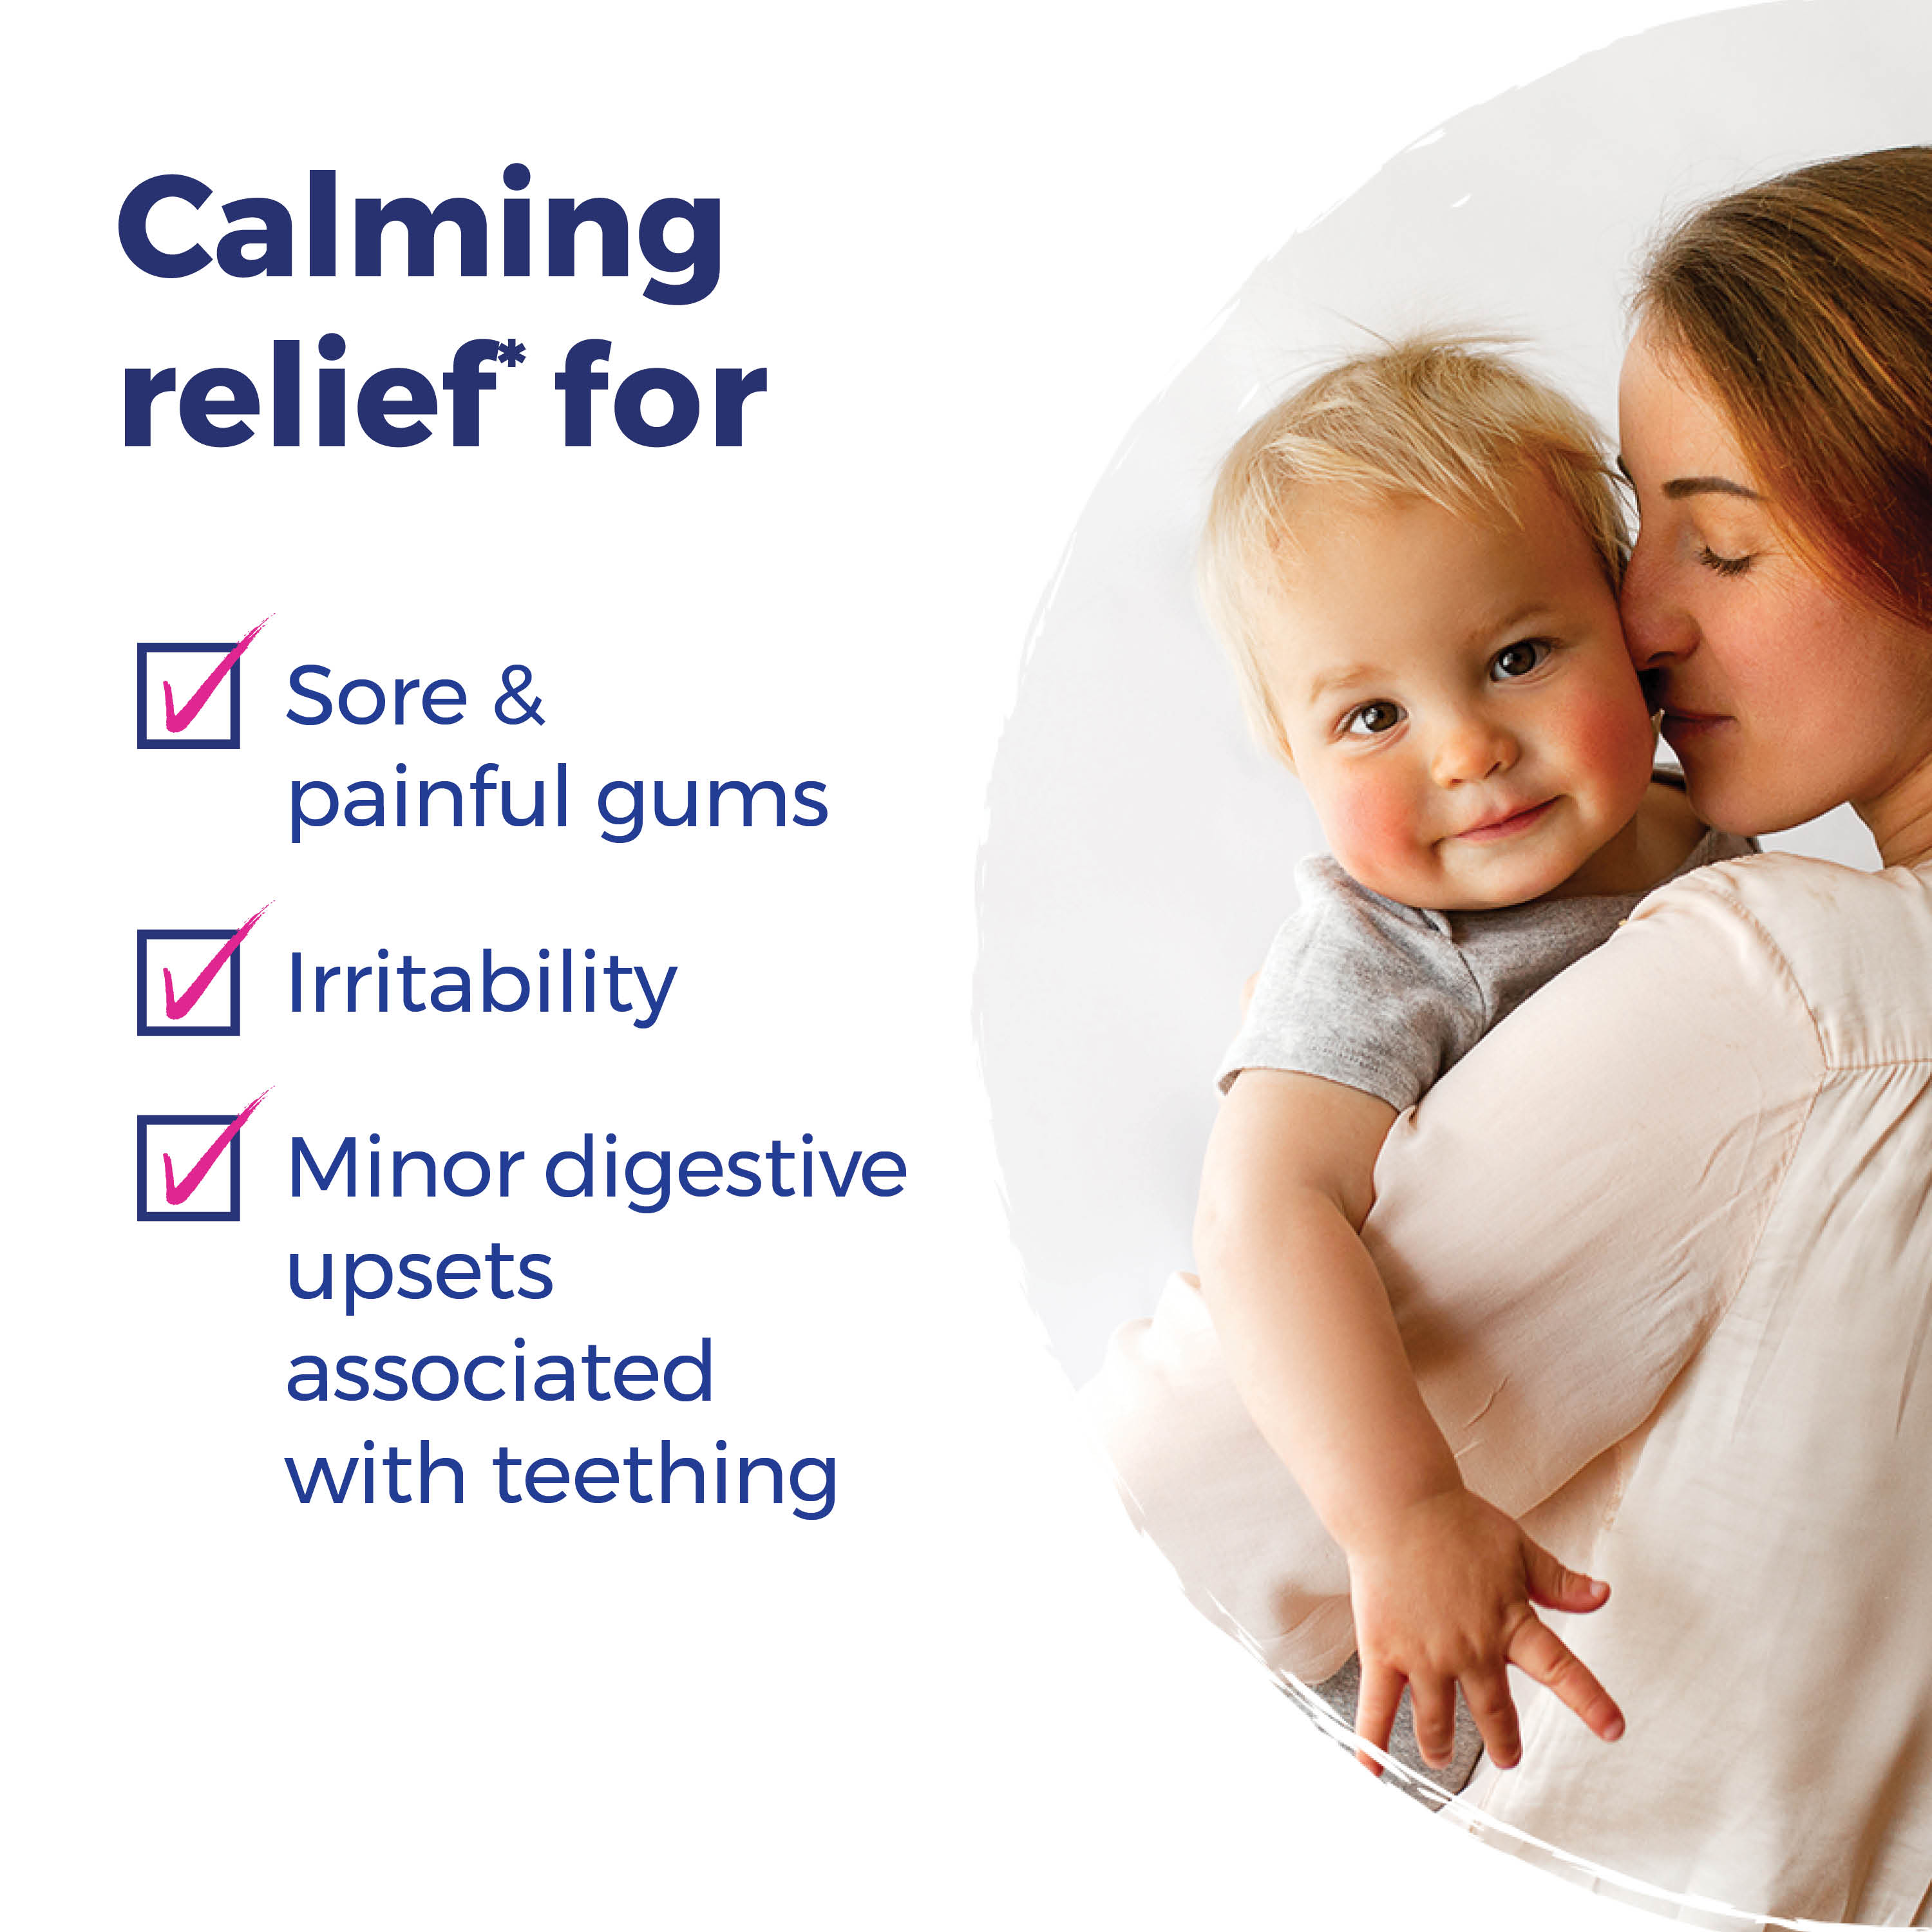 Boiron Camilia Teething Drops for Daytime and Nighttime Relief of Painful or Swollen Gums and Irritability in Babies, Irritability, 30 Single Liquid Doses - image 5 of 11